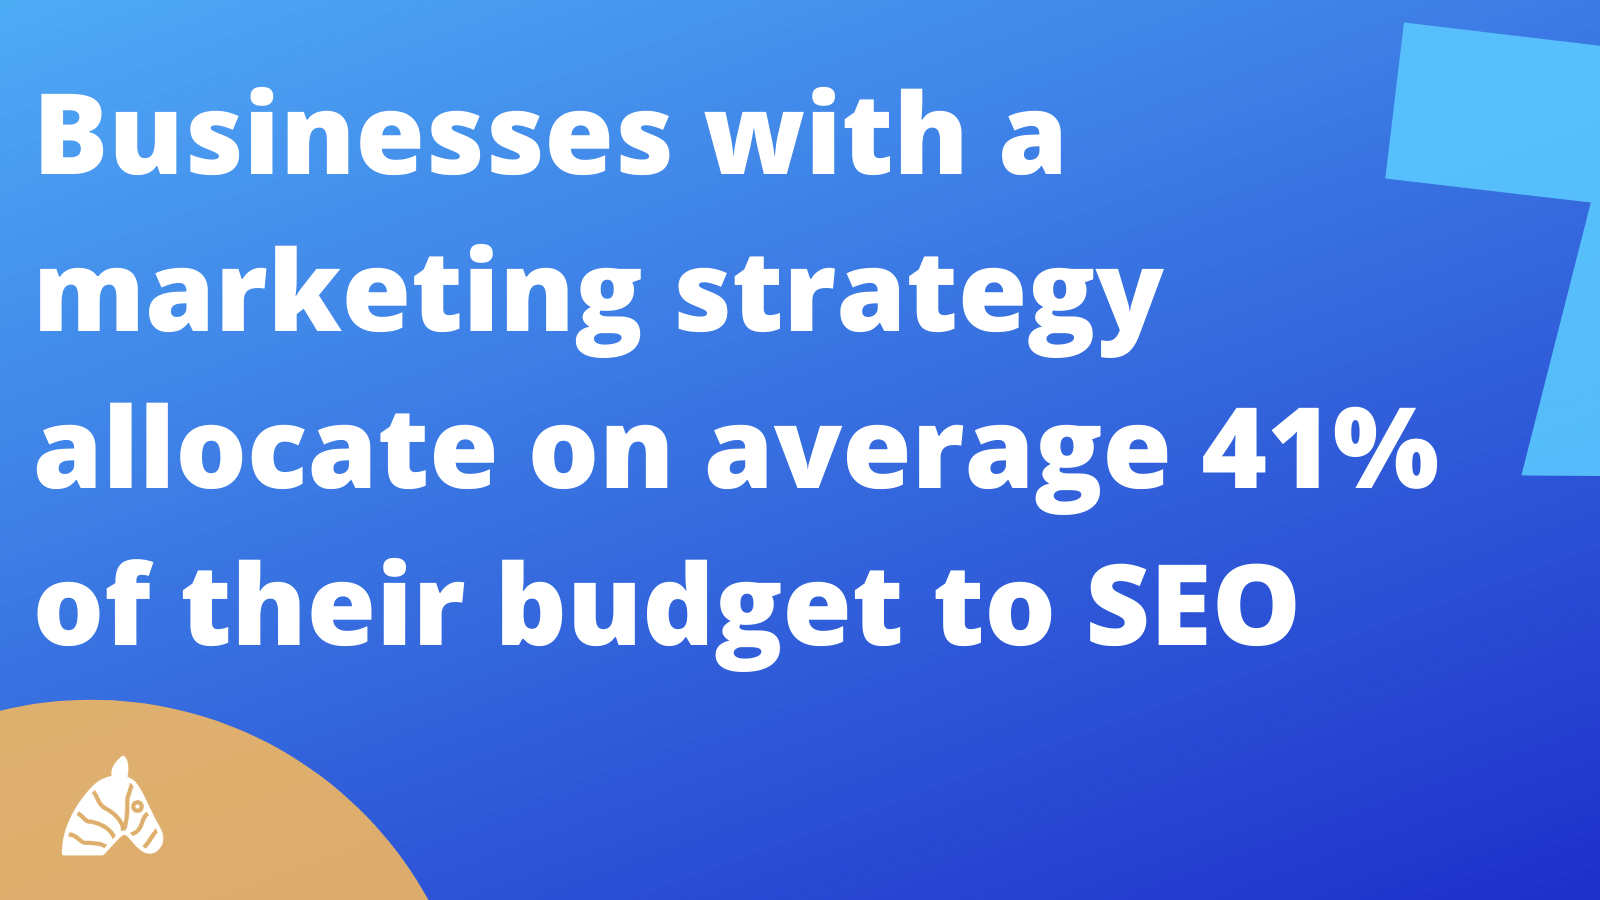 SEO Statistic about marketing budget allocated to SEO strategies